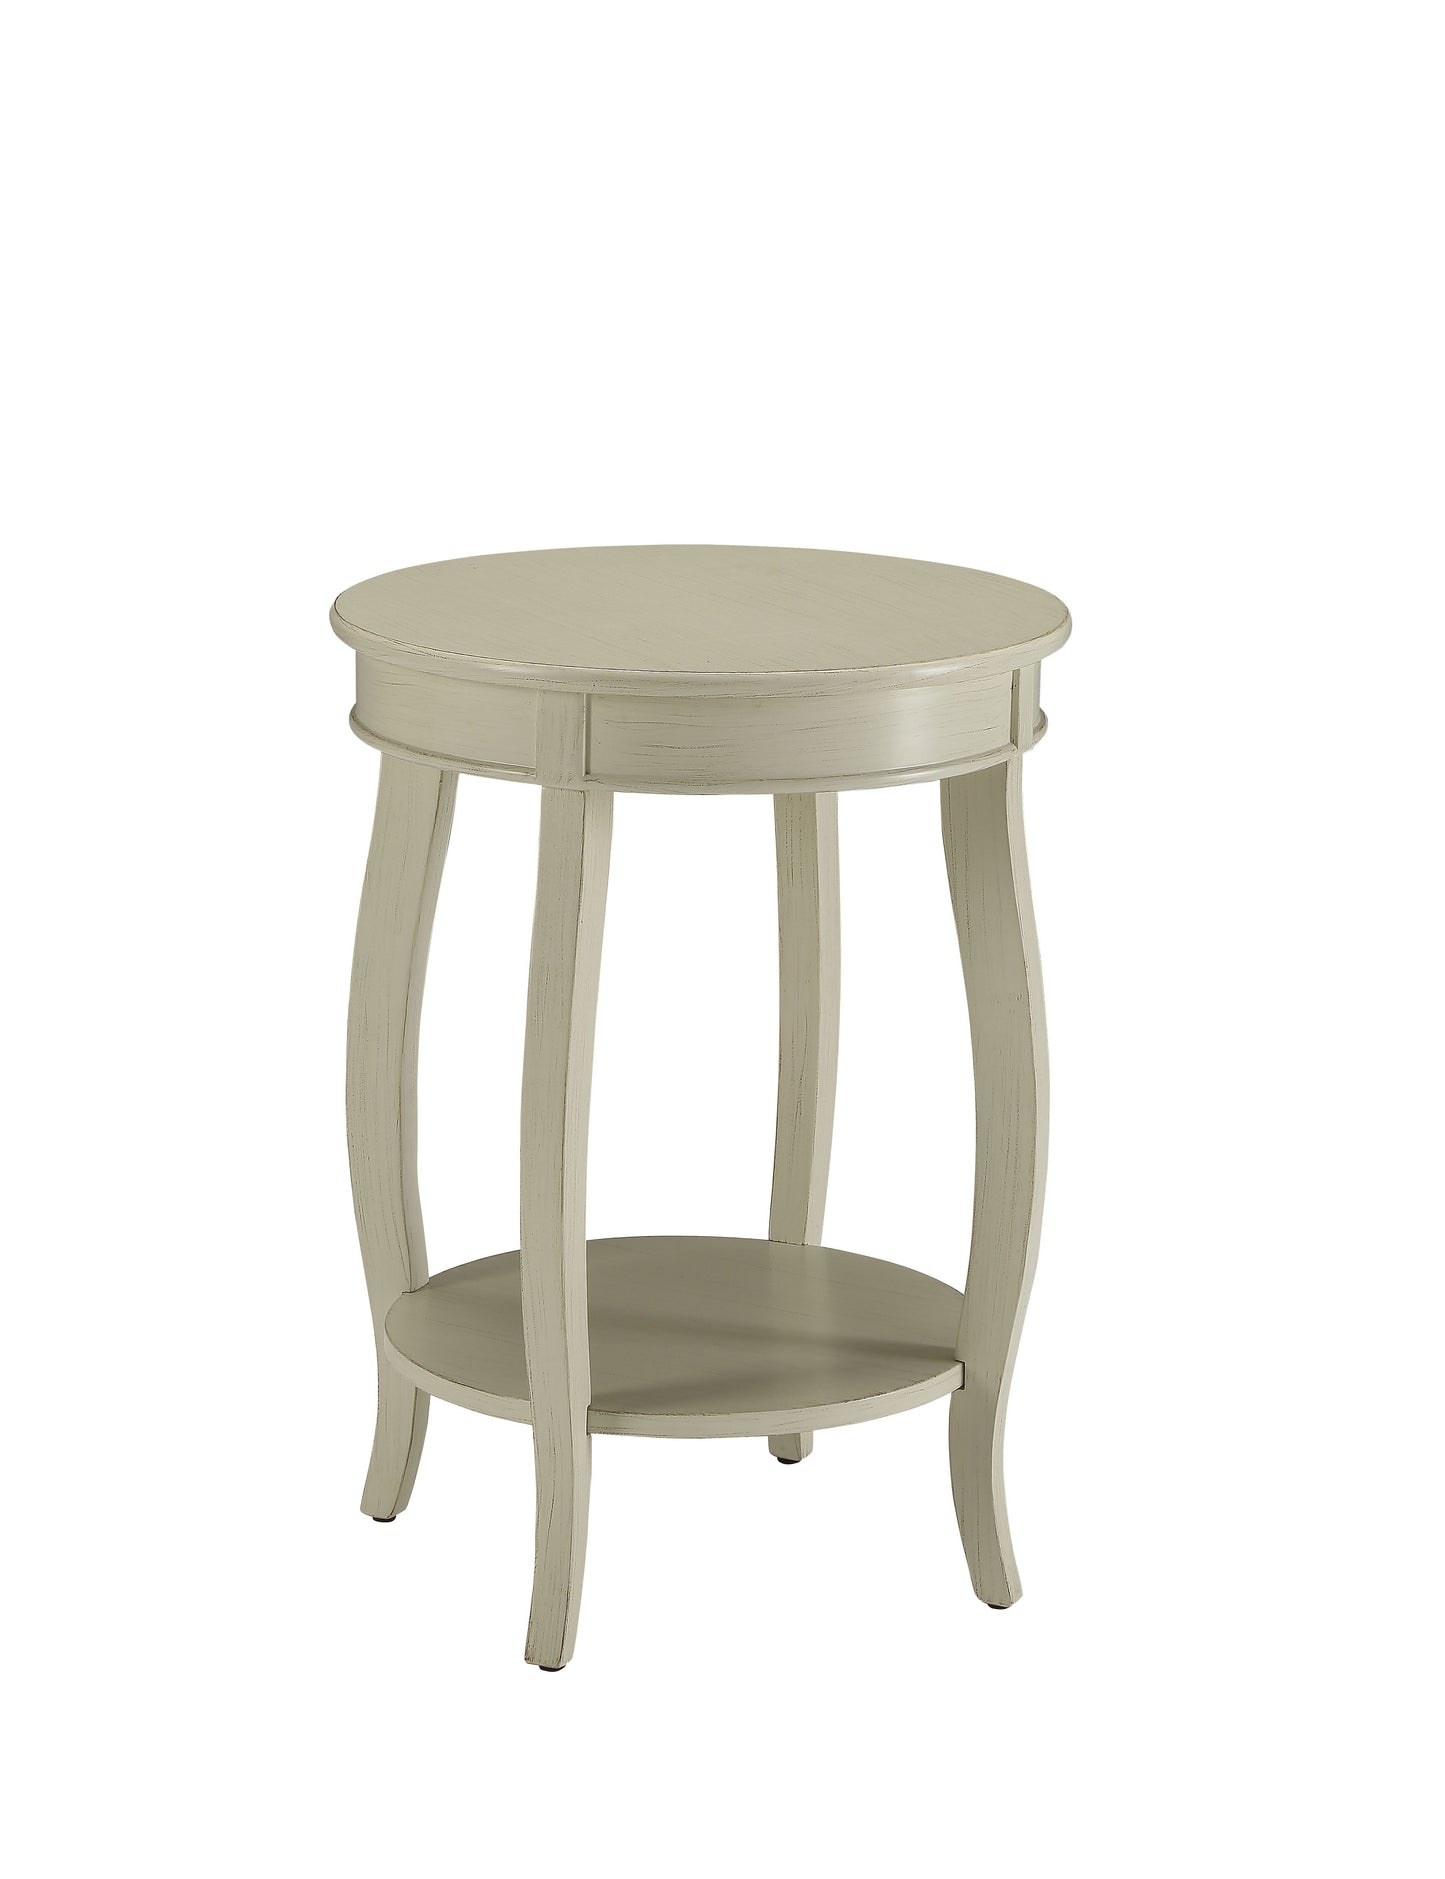 Aberta Side Table in Antique, White